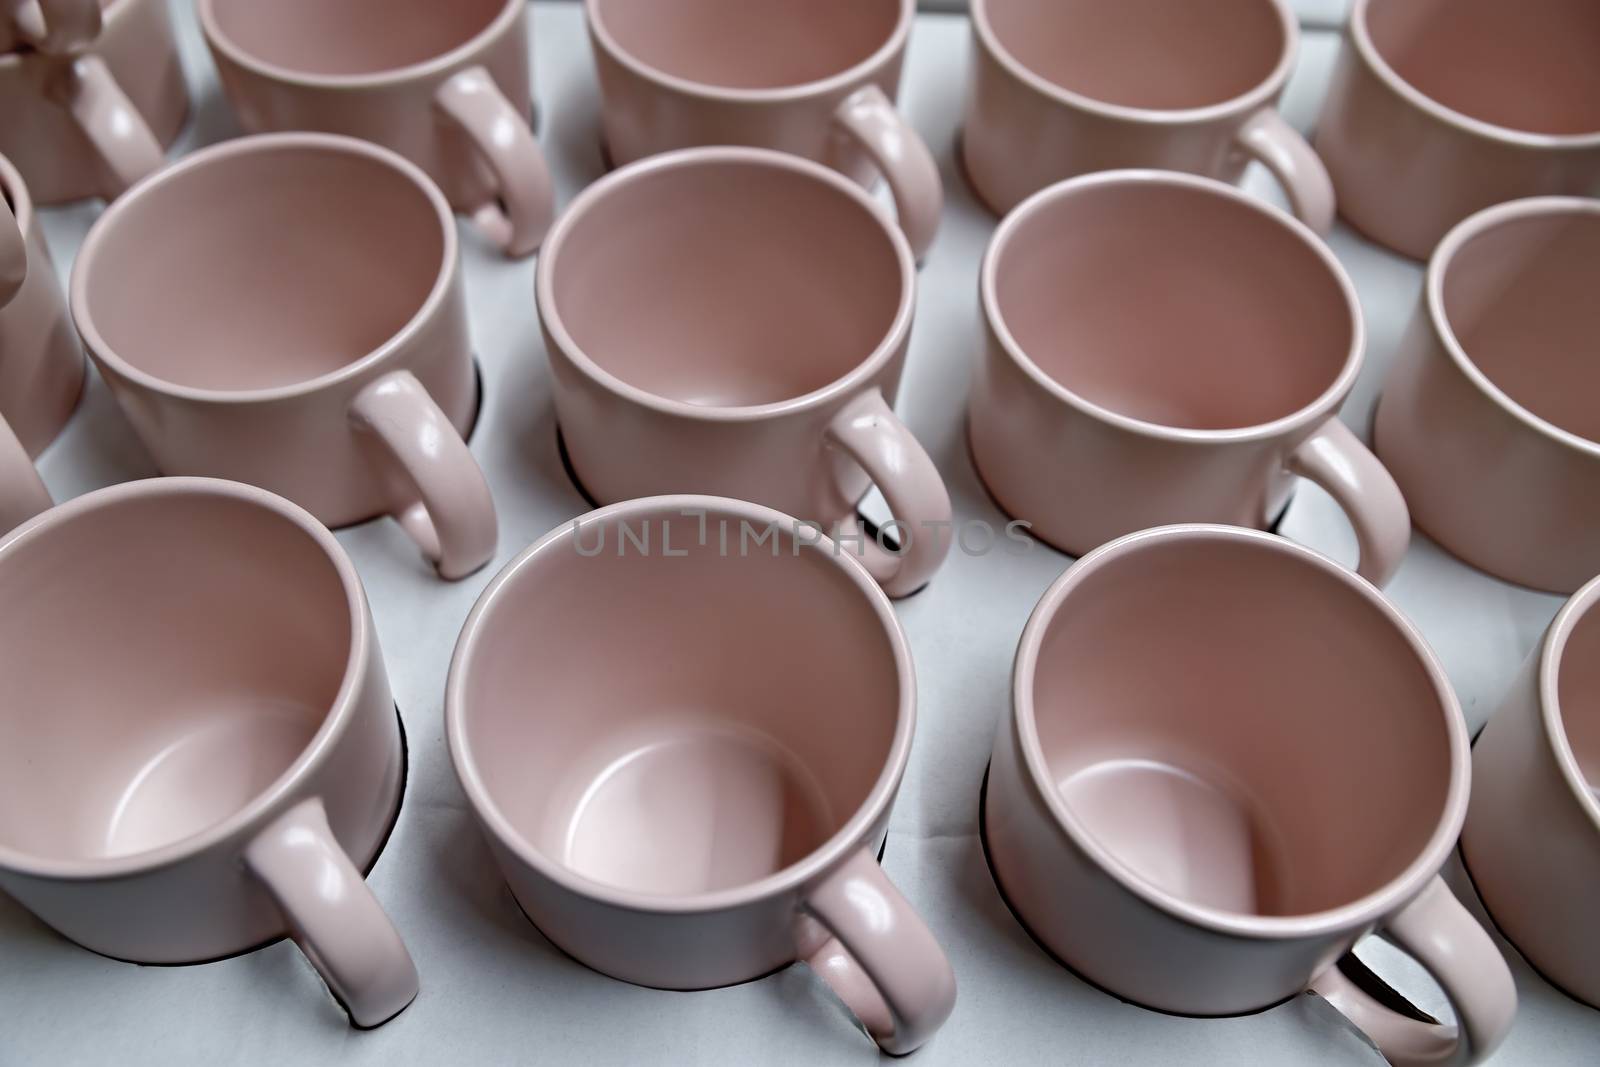 Rows of little pink tea mugs. Abstract background.